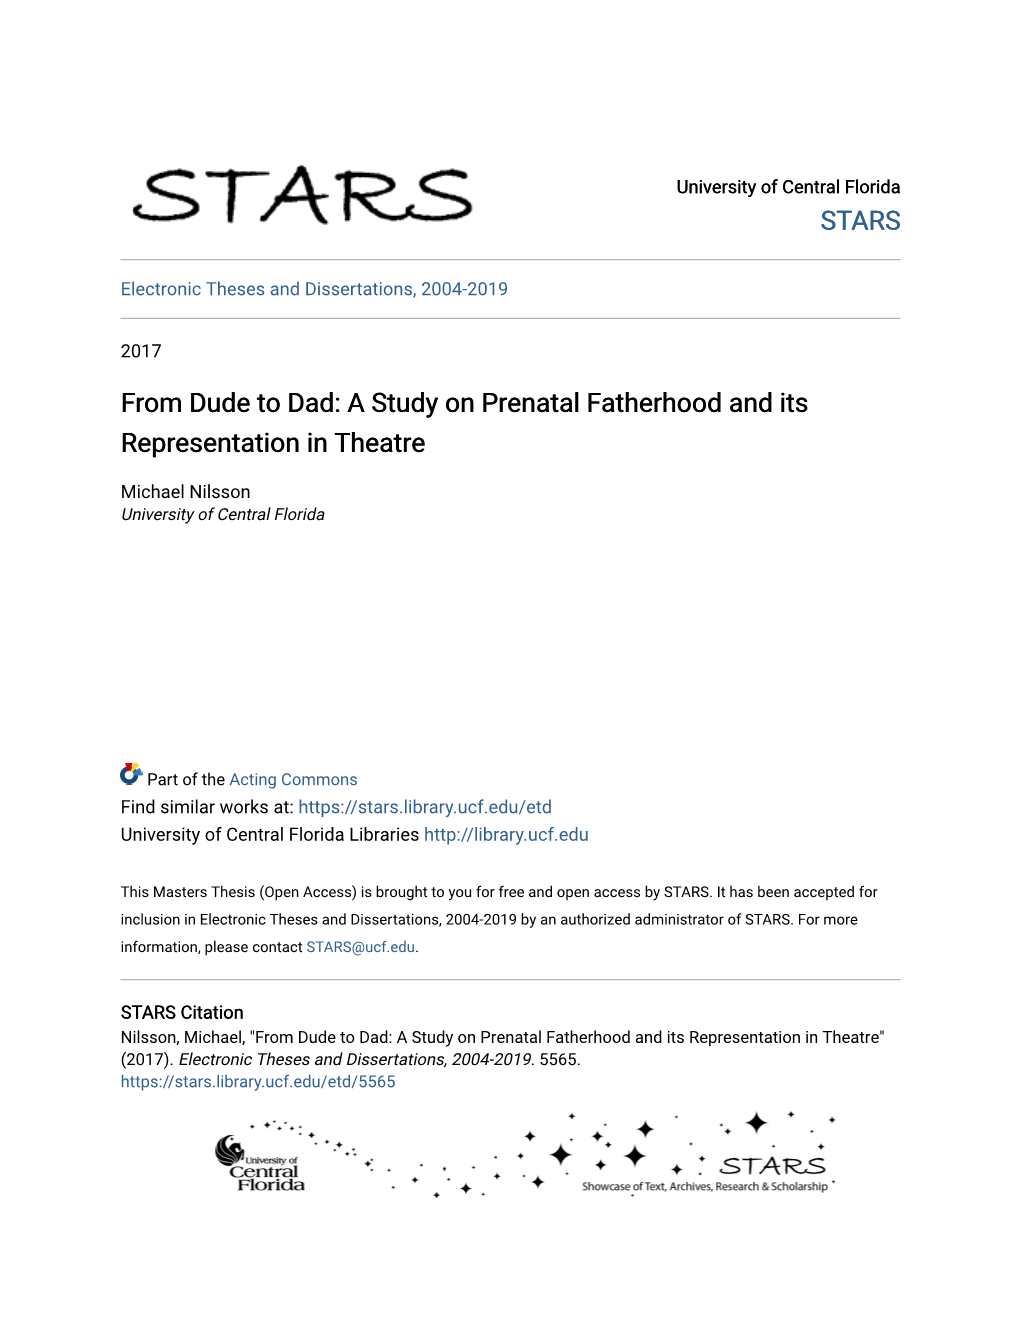 From Dude to Dad: a Study on Prenatal Fatherhood and Its Representation in Theatre